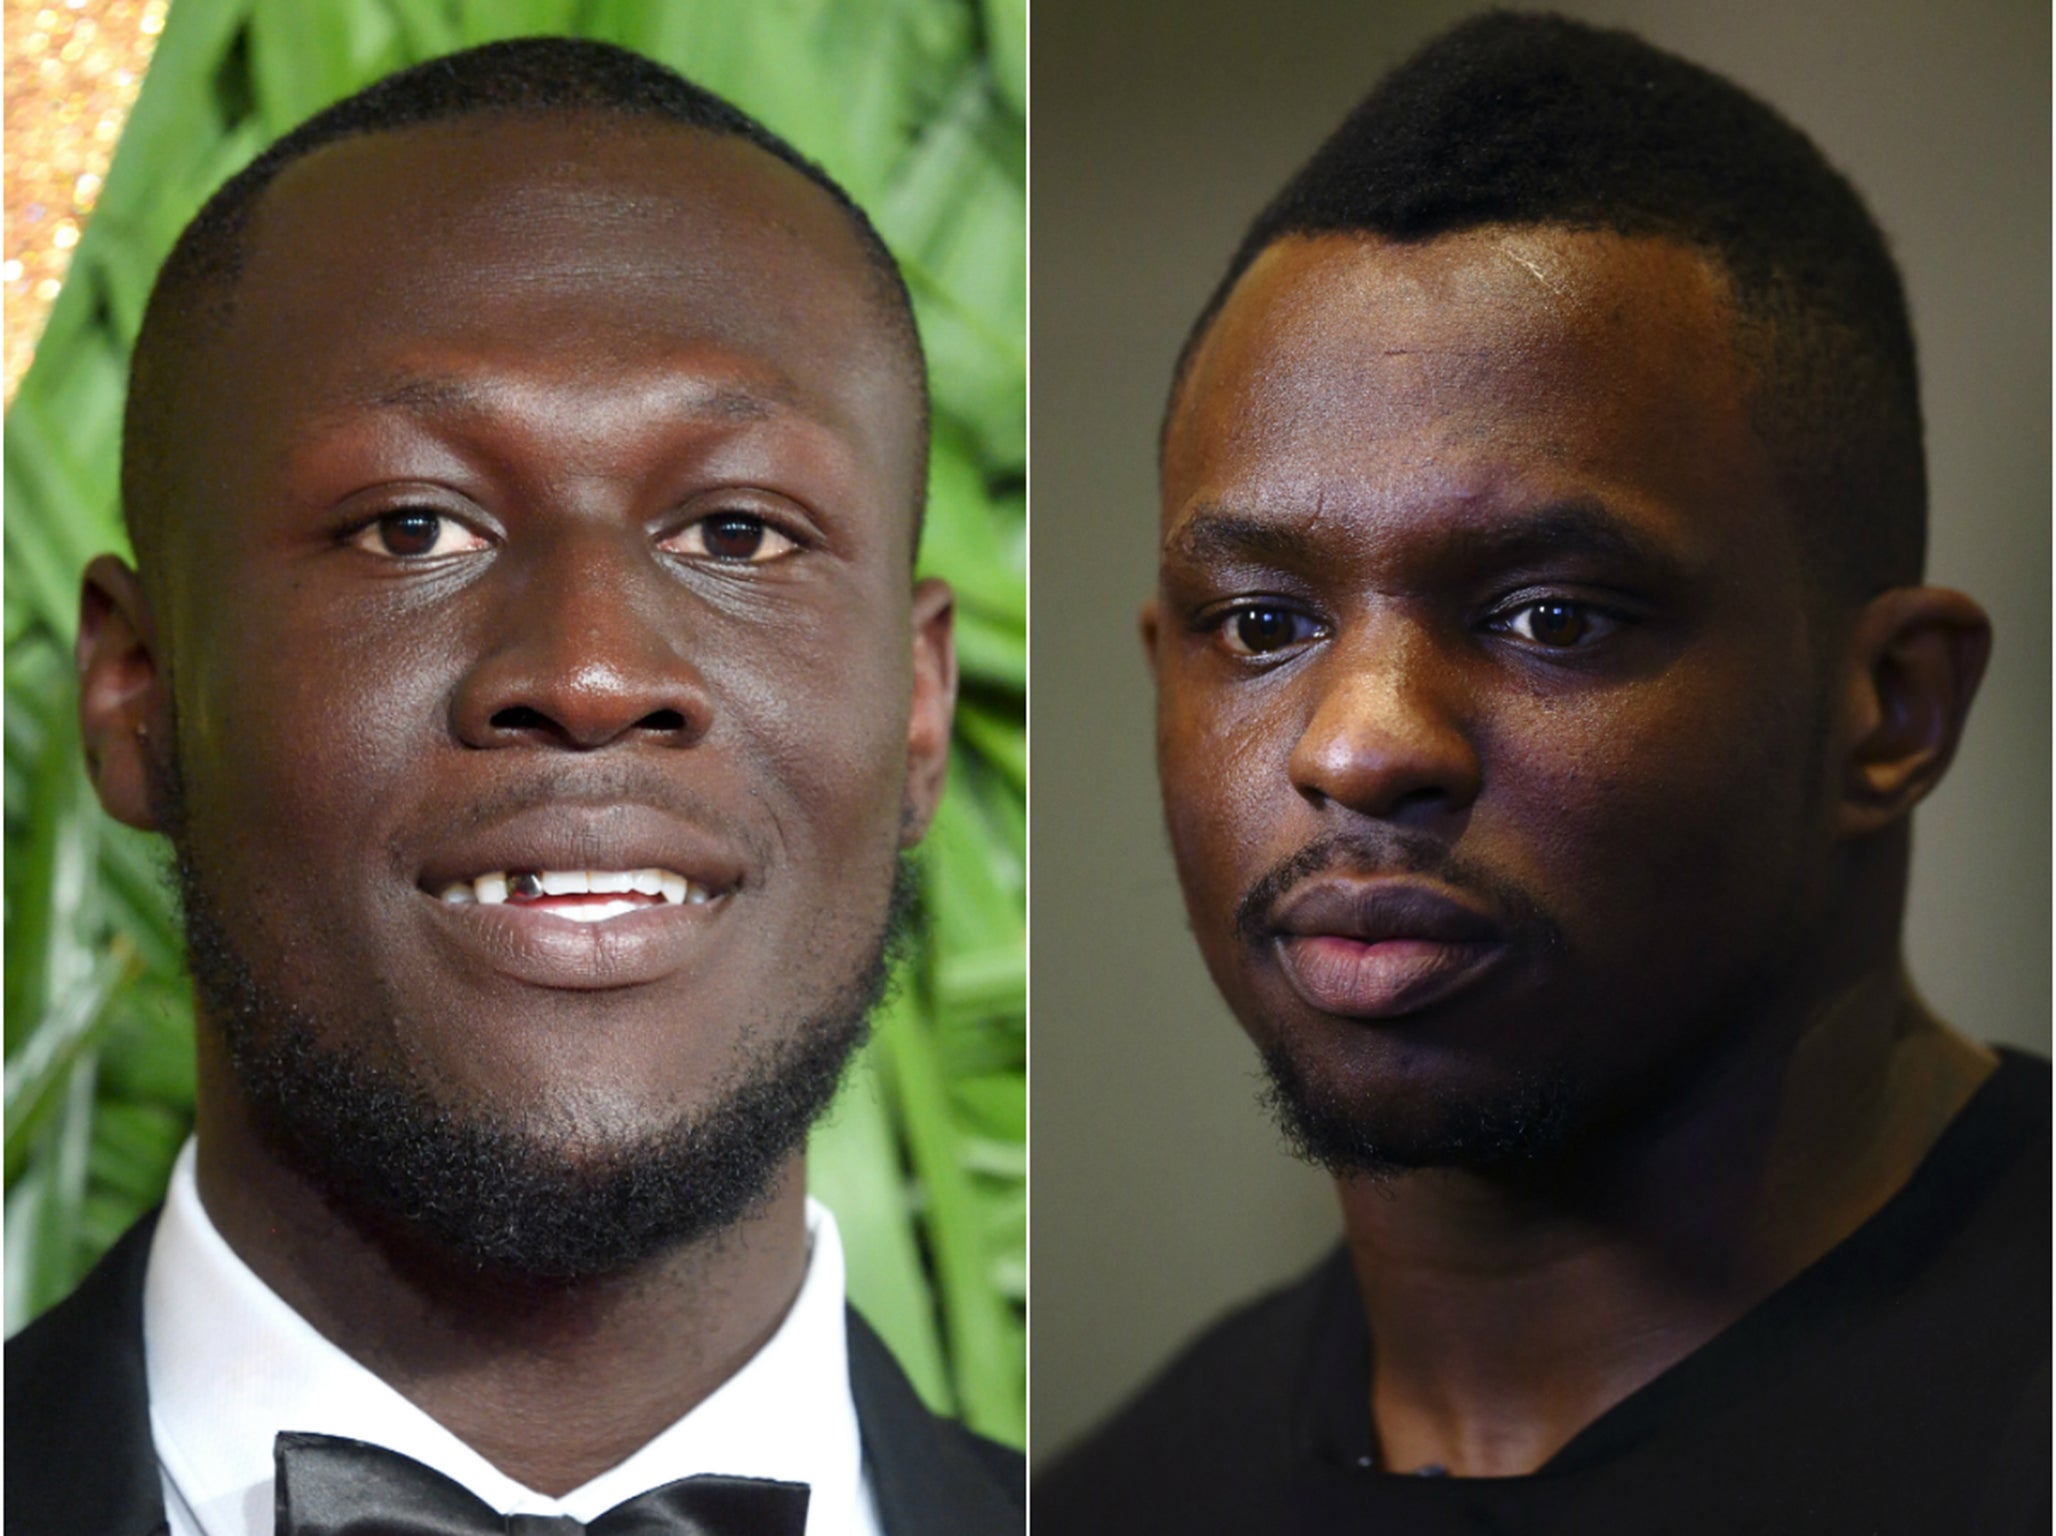 Stormzy feud has ended confirms Dillian Whyte